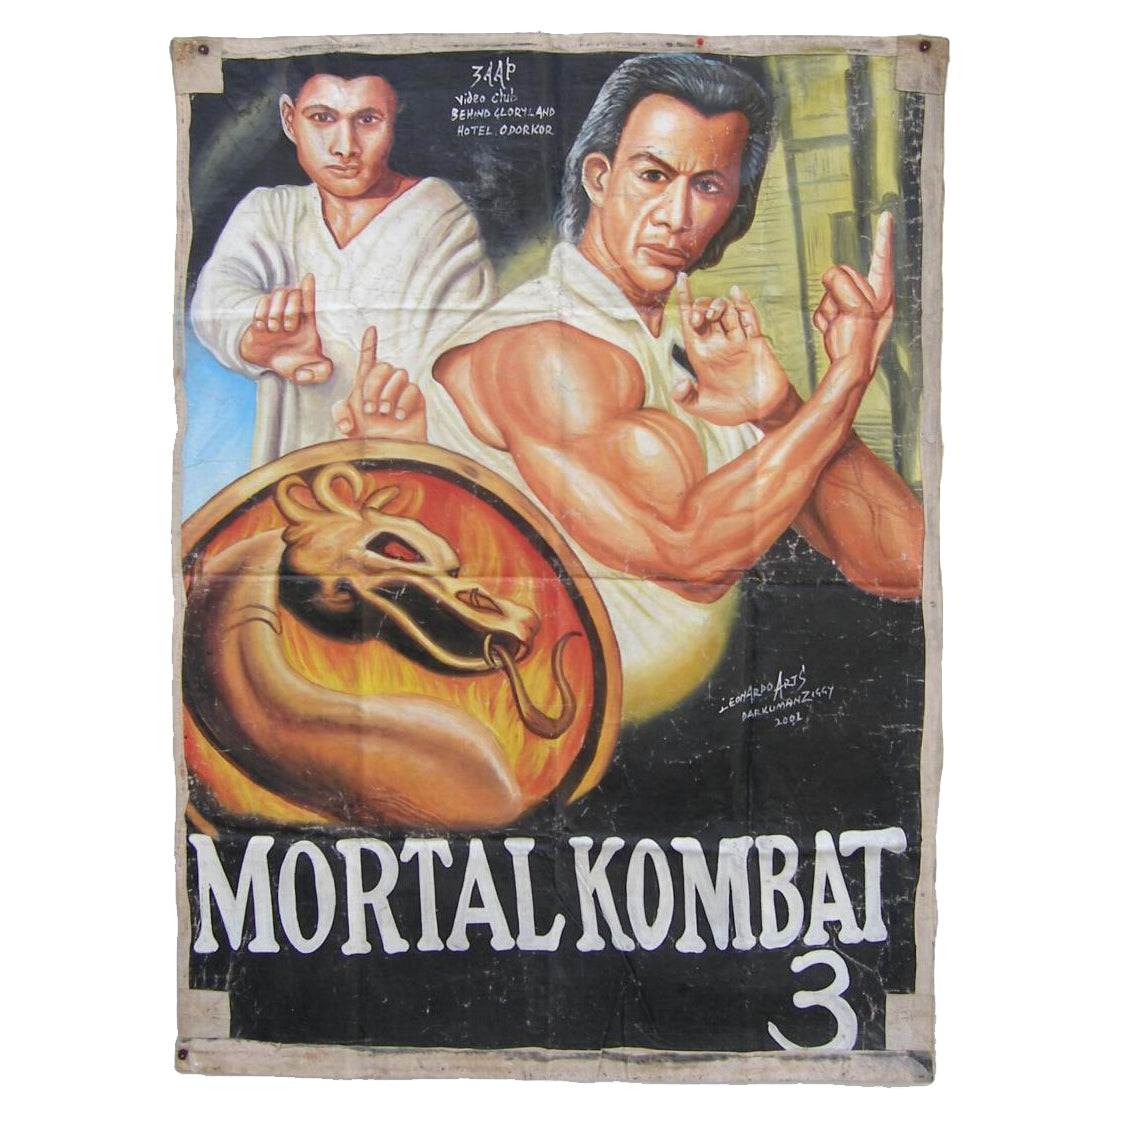 MORTAL KOMBAT 3 MOVIE POSTER HAND PAINTED IN GHANA FOR THE LOCAL CINEMA FILM ART